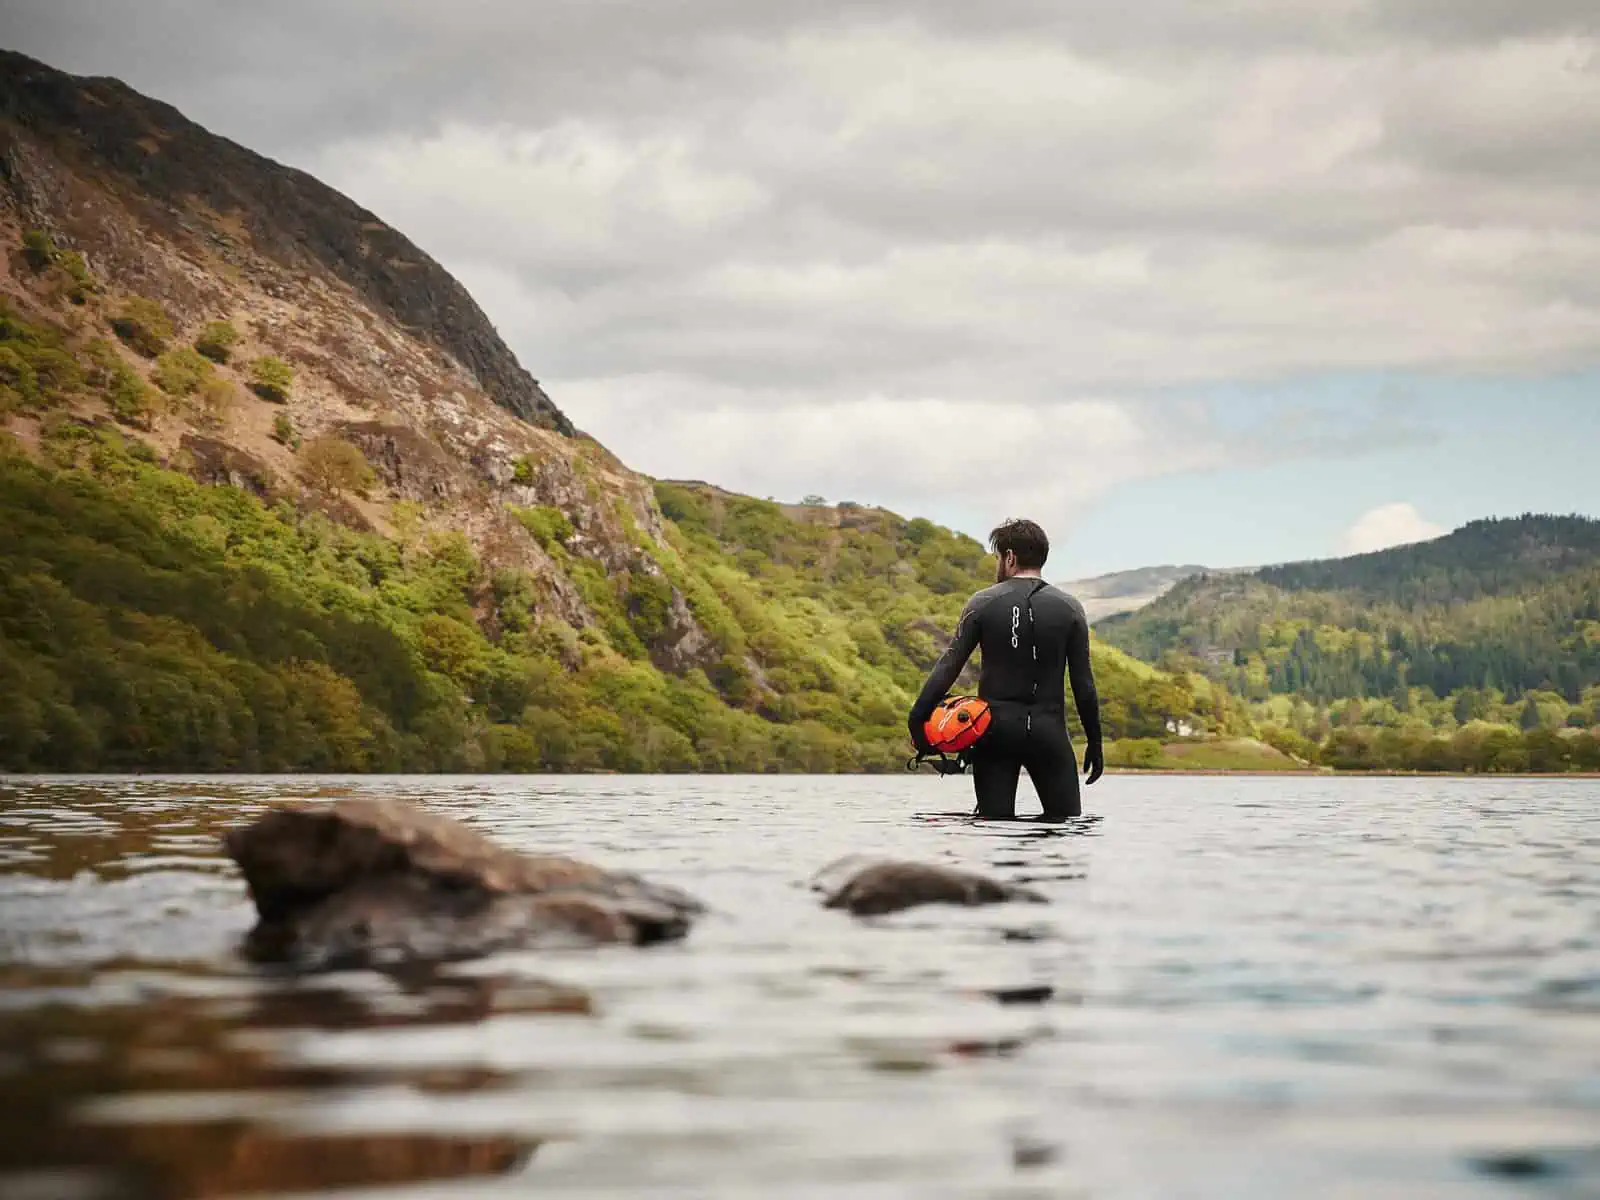 Turning Passion into Action: How spending time in the water can help us to feel more connected to the places we love and create change - Fm Dsc F